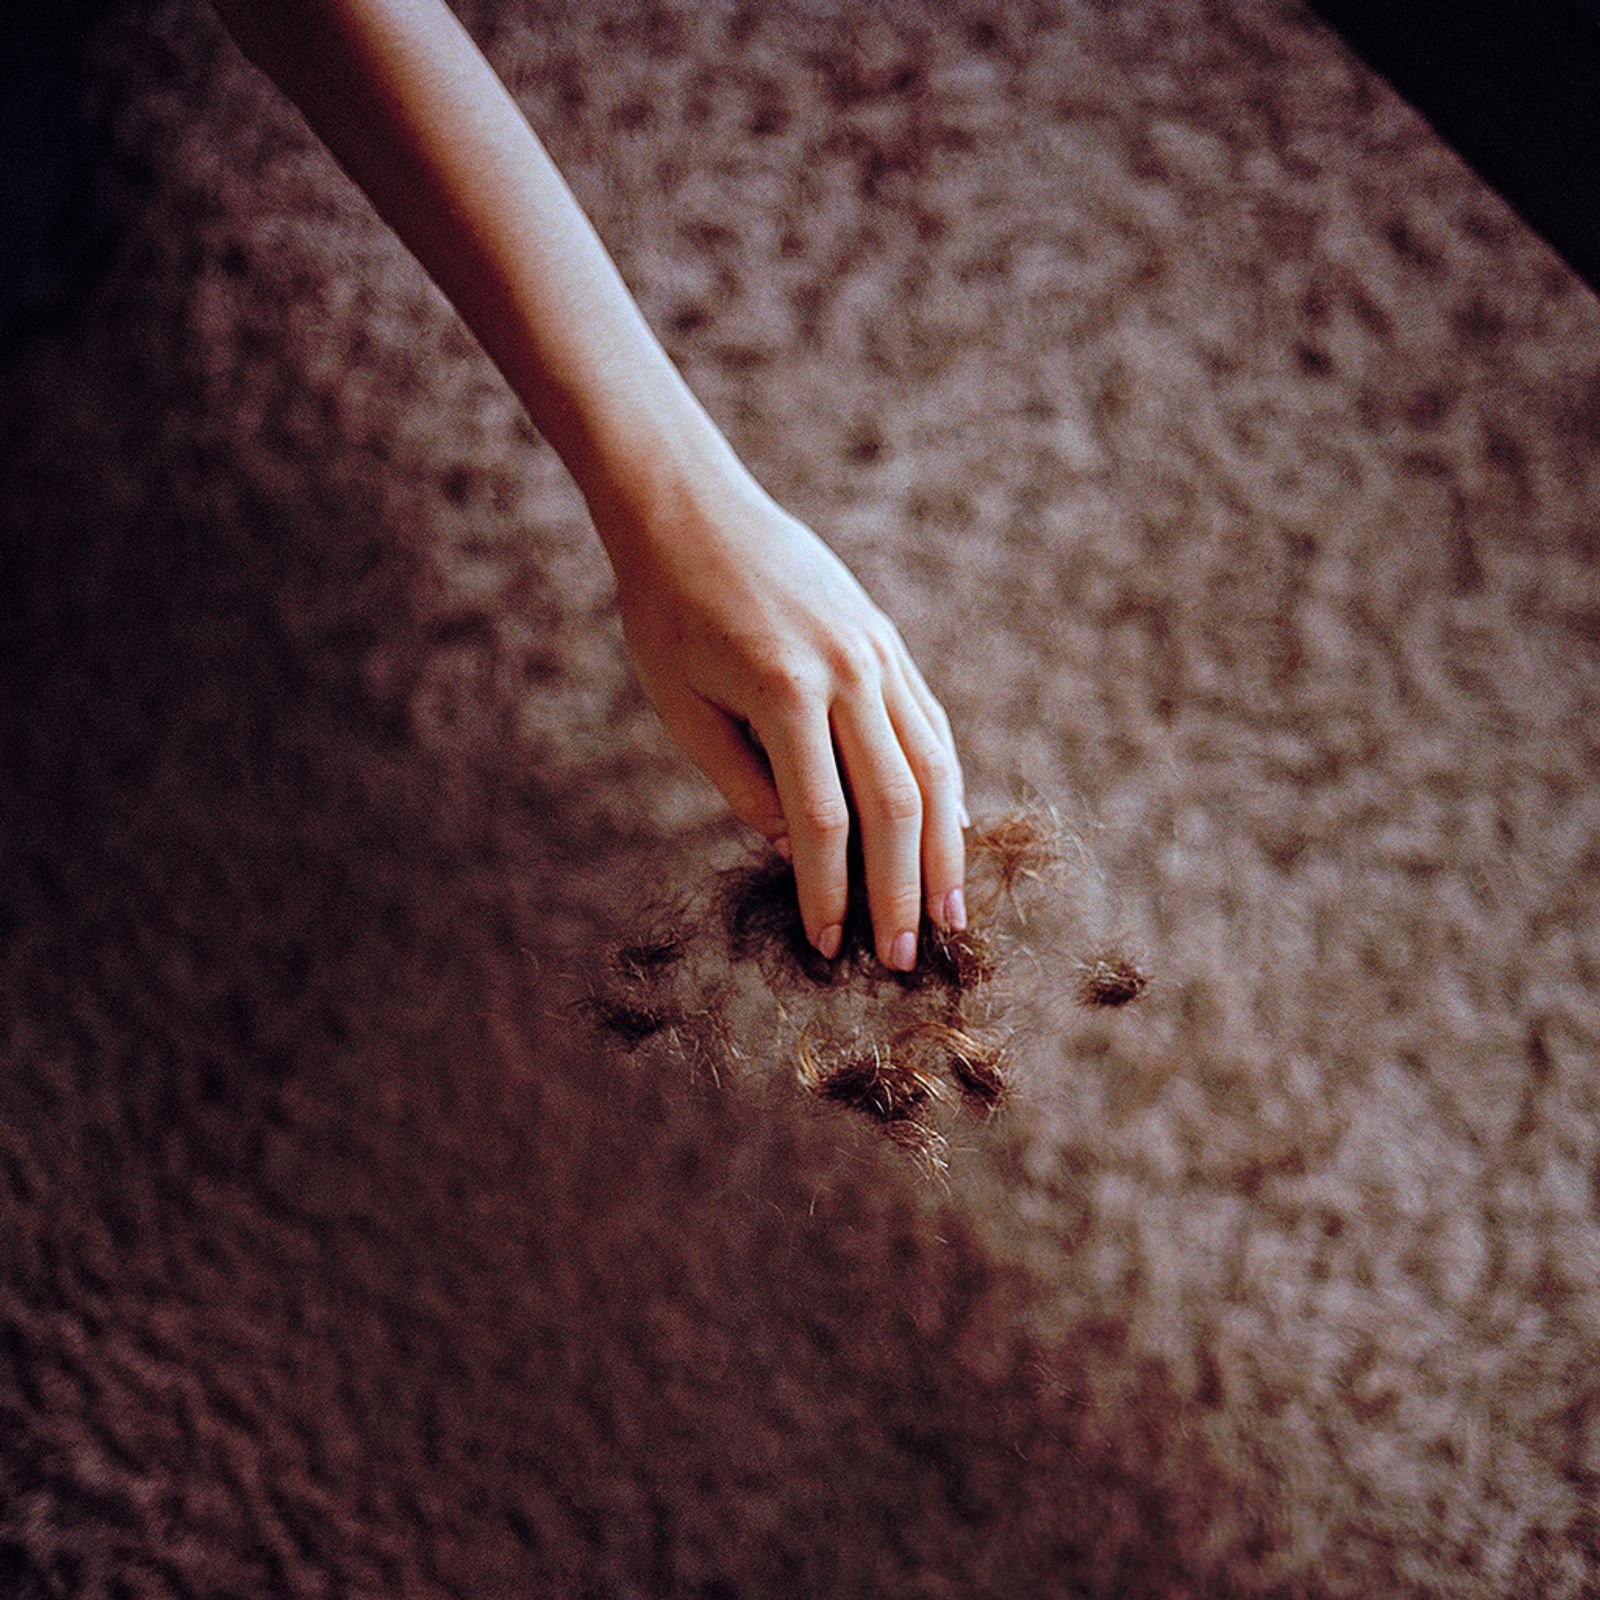 © Angela Crosti - Image from the You Are Everything to Me photography project